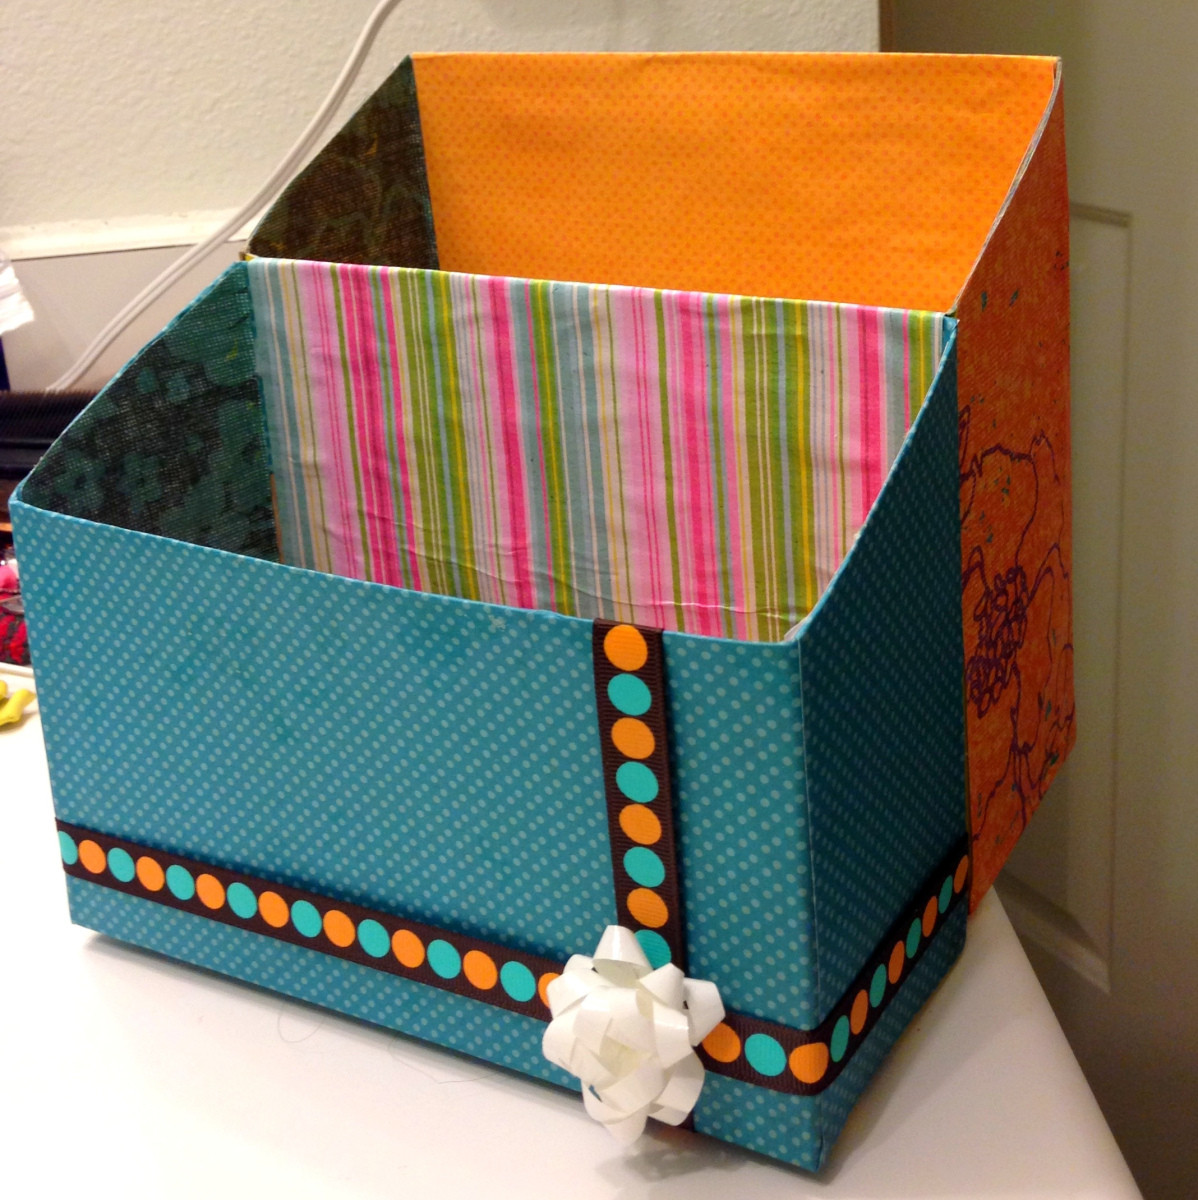 Mail Organizer DIY
 DIY mail organizer from cereal box